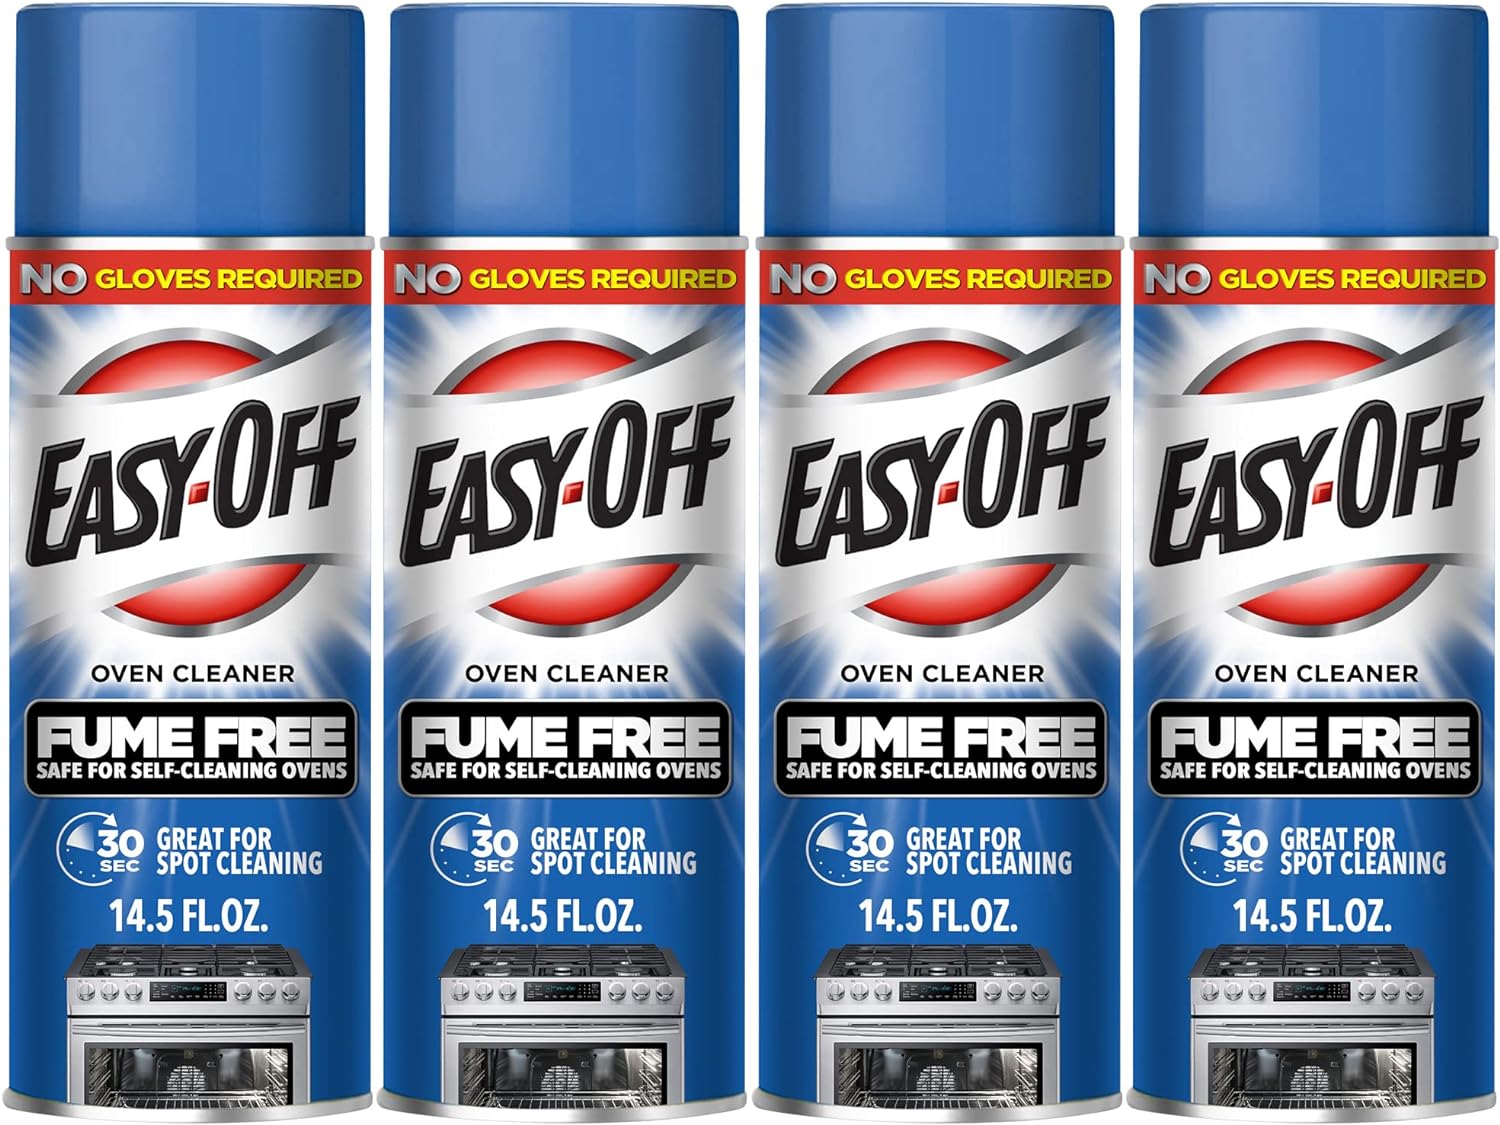 Easy-Off Fume Free Oven Cleaner, Lemon 14.5 Oz Can (Pack of 4)